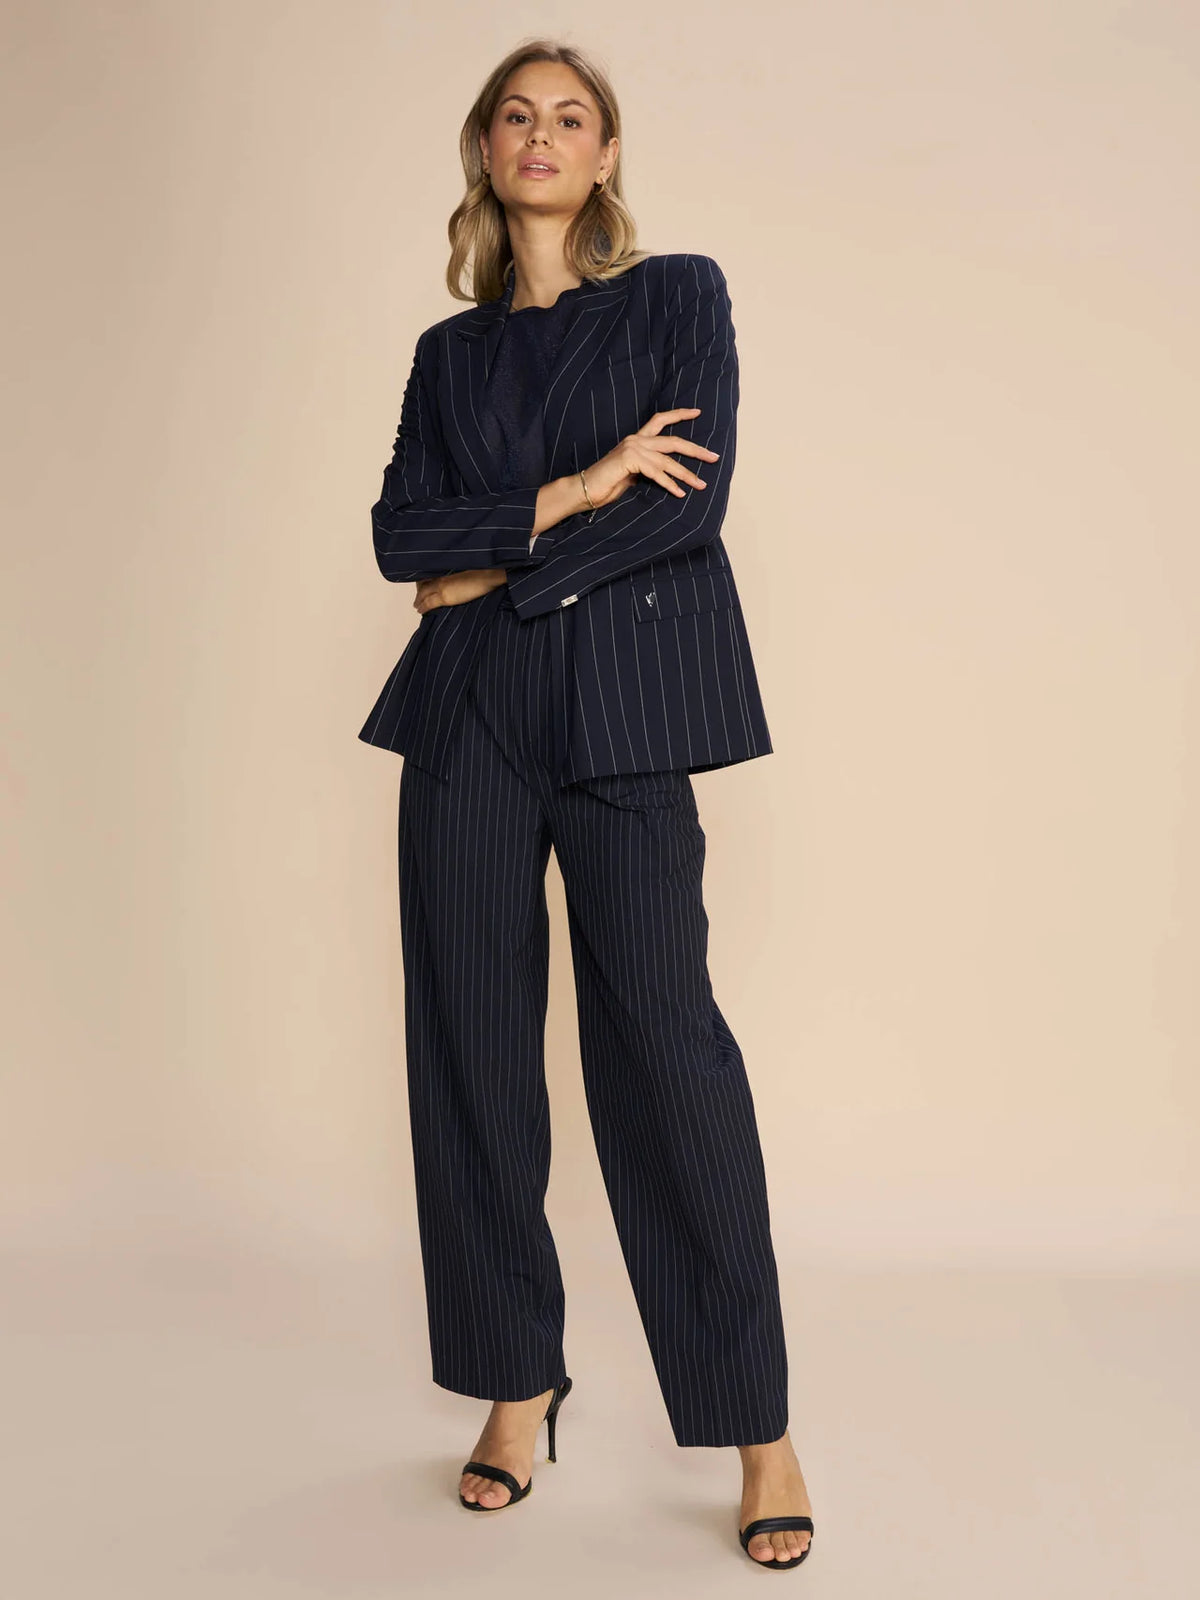 Tapered leg navy and white pinstripe tailored trousers with front pleats and side pockets